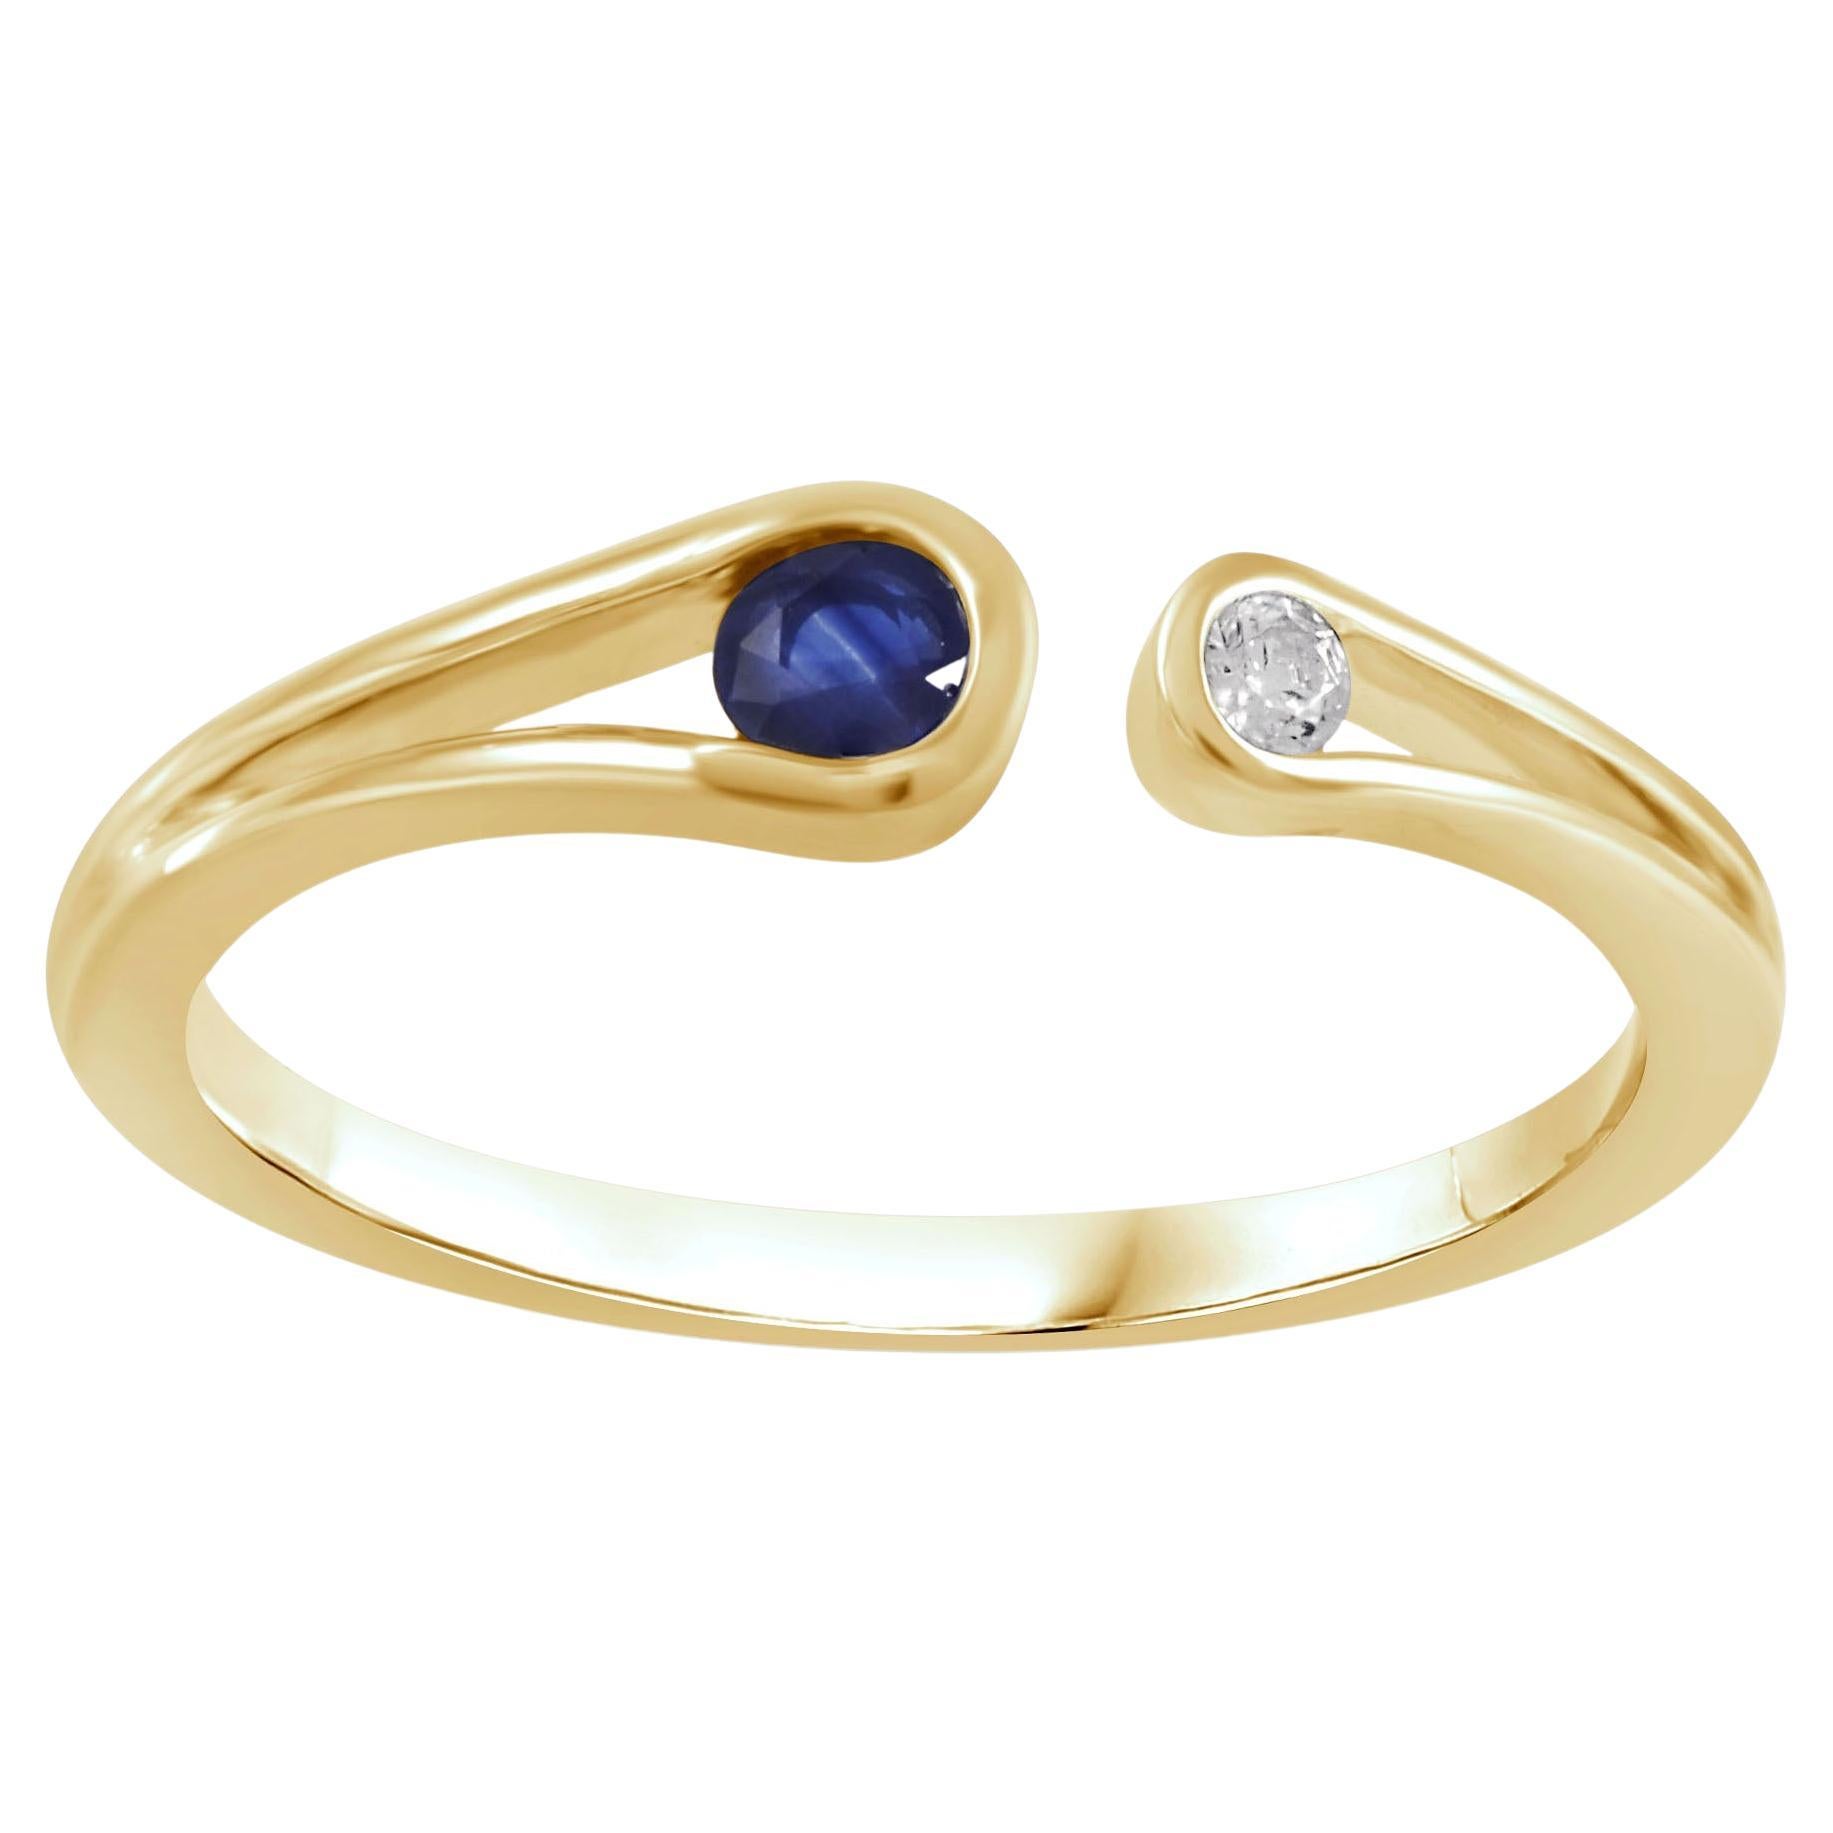 Great as a fashion ring, wear it alone or with a hand full of rings. Features a round blue sapphire and a round diamond.

Available in US Size 6 and 7.

14K White Gold Diamond and Blue Sapphire Ring
- Diamond Quality: H/SI
- Diamond Weight: 0.04 ct